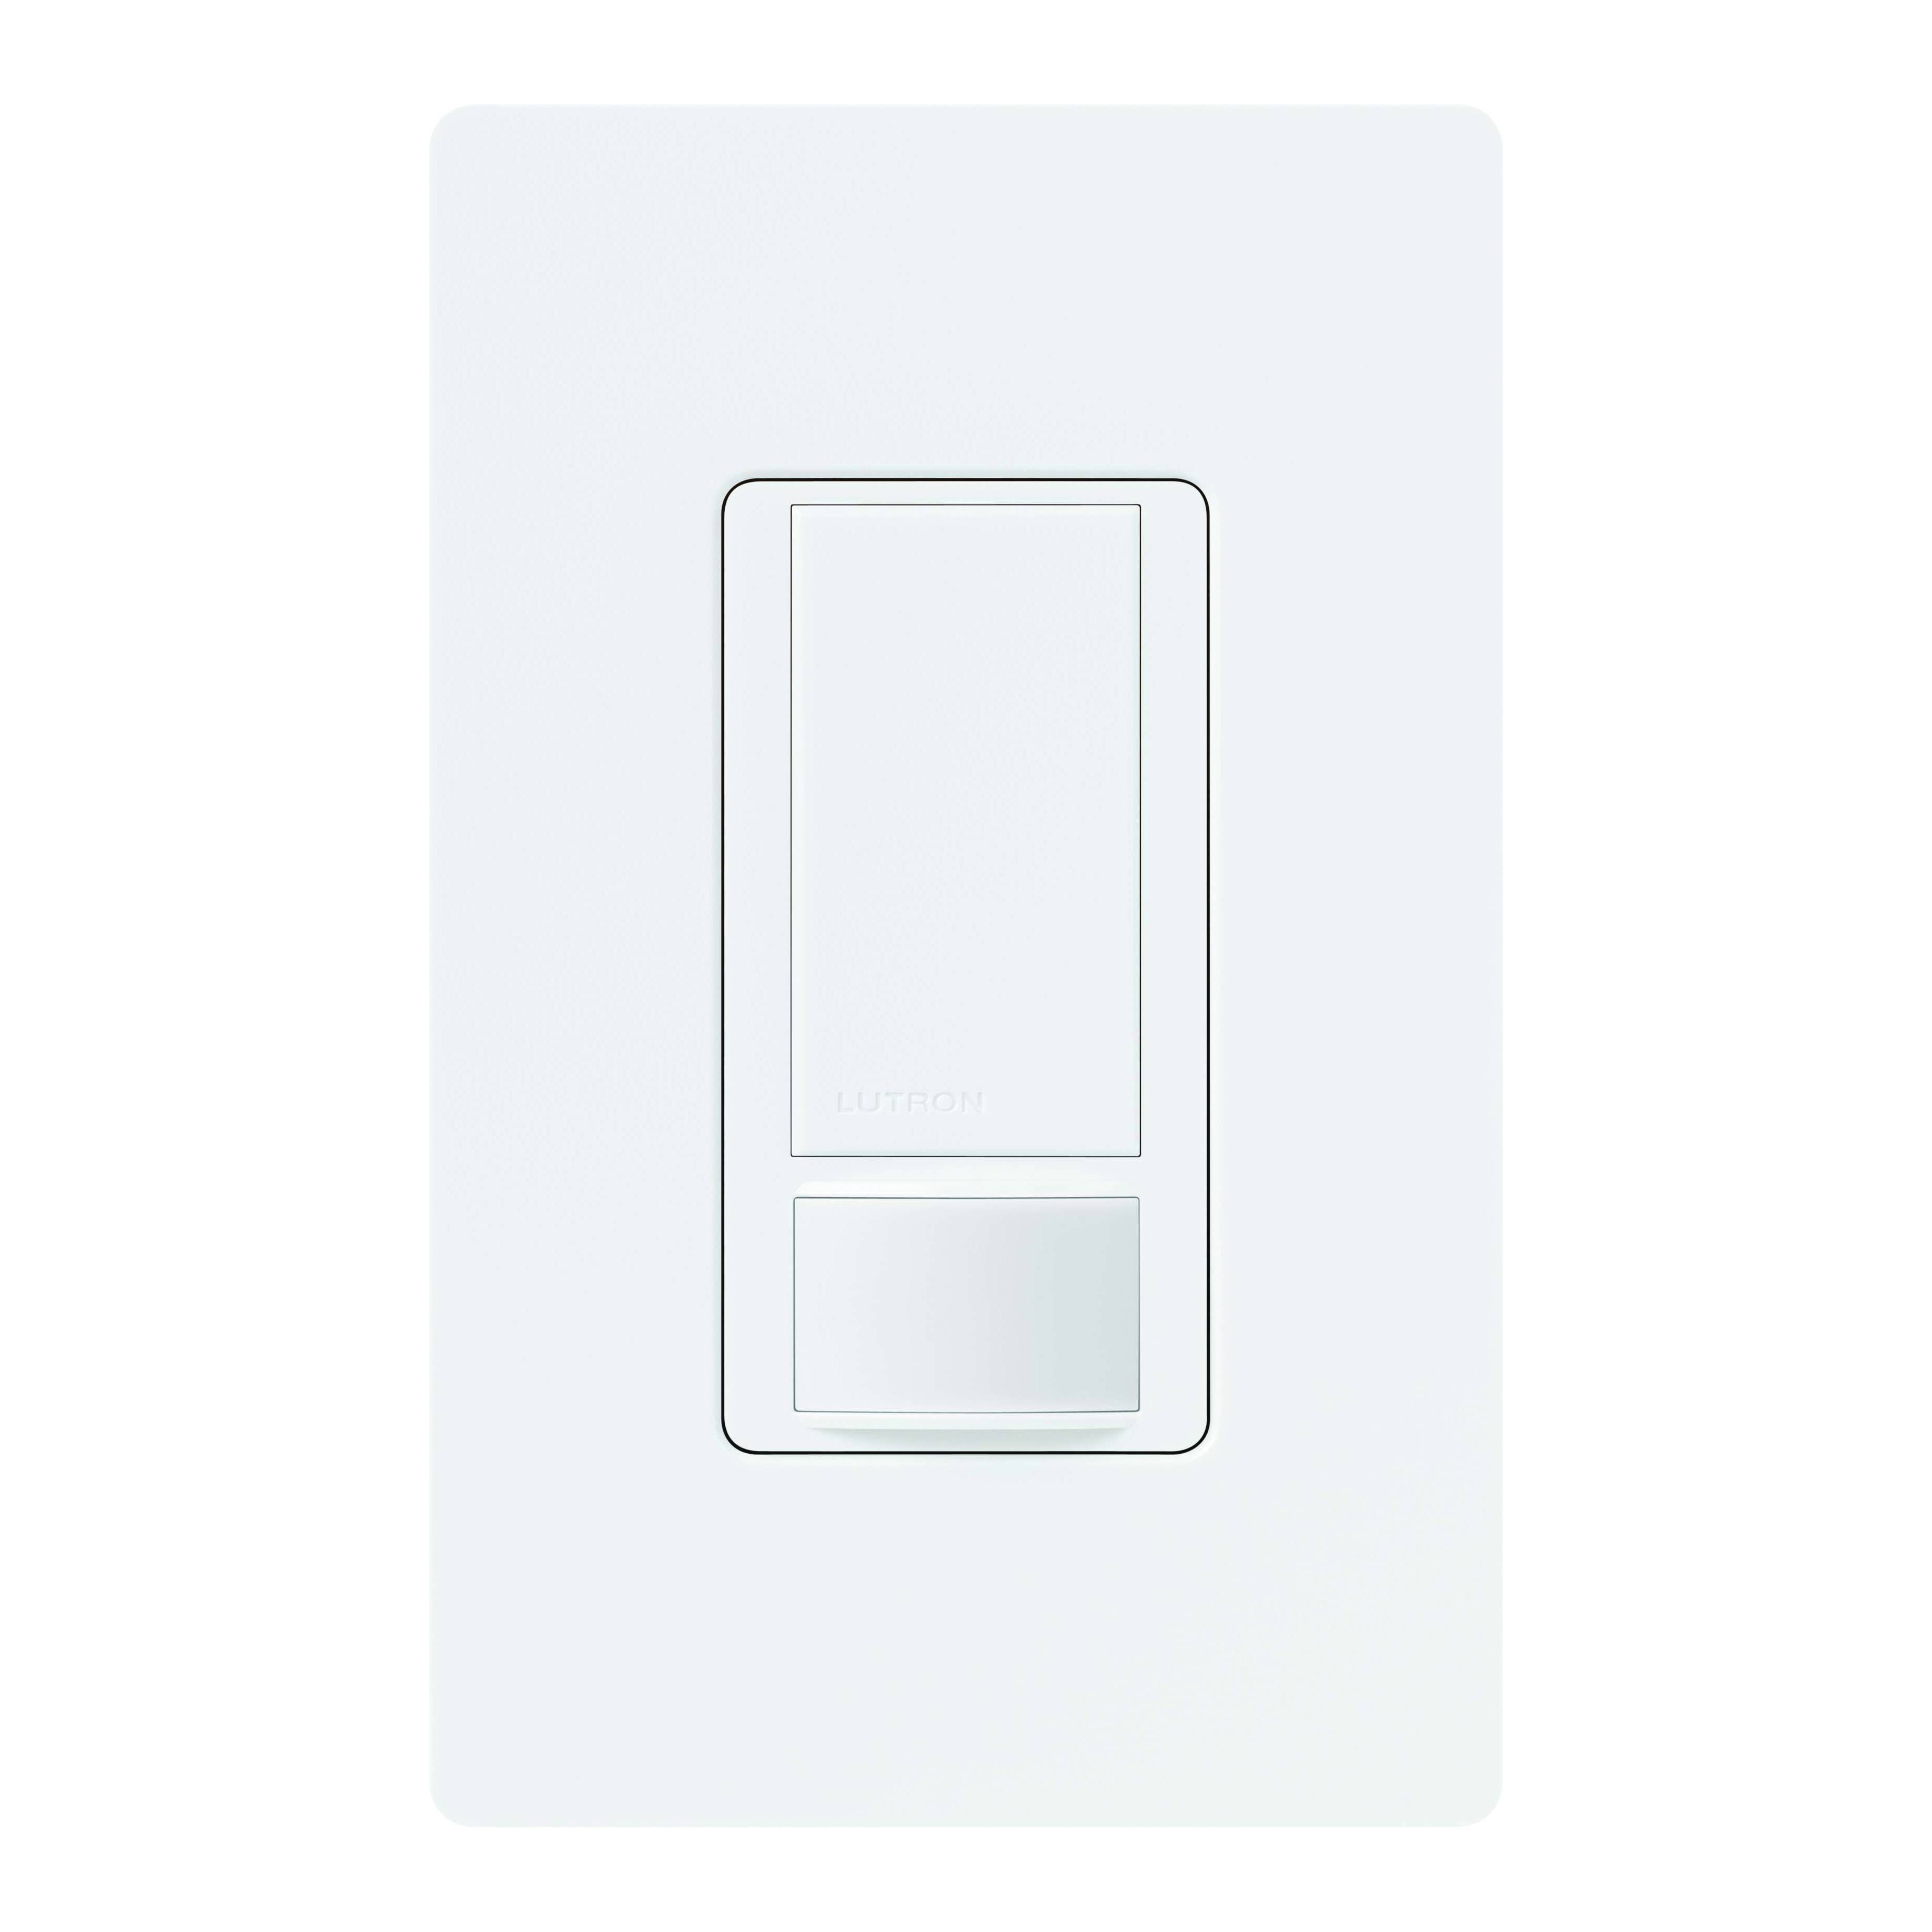 Lutron® Maestro® MS-OPS2-WH 1-Pole Occupancy Sensing Switch, 120 VAC, Passive Infrared Sensor, 400 sq-ft Minor, 900 sq-ft Major Coverage, 180 deg Viewing, Wall Mount